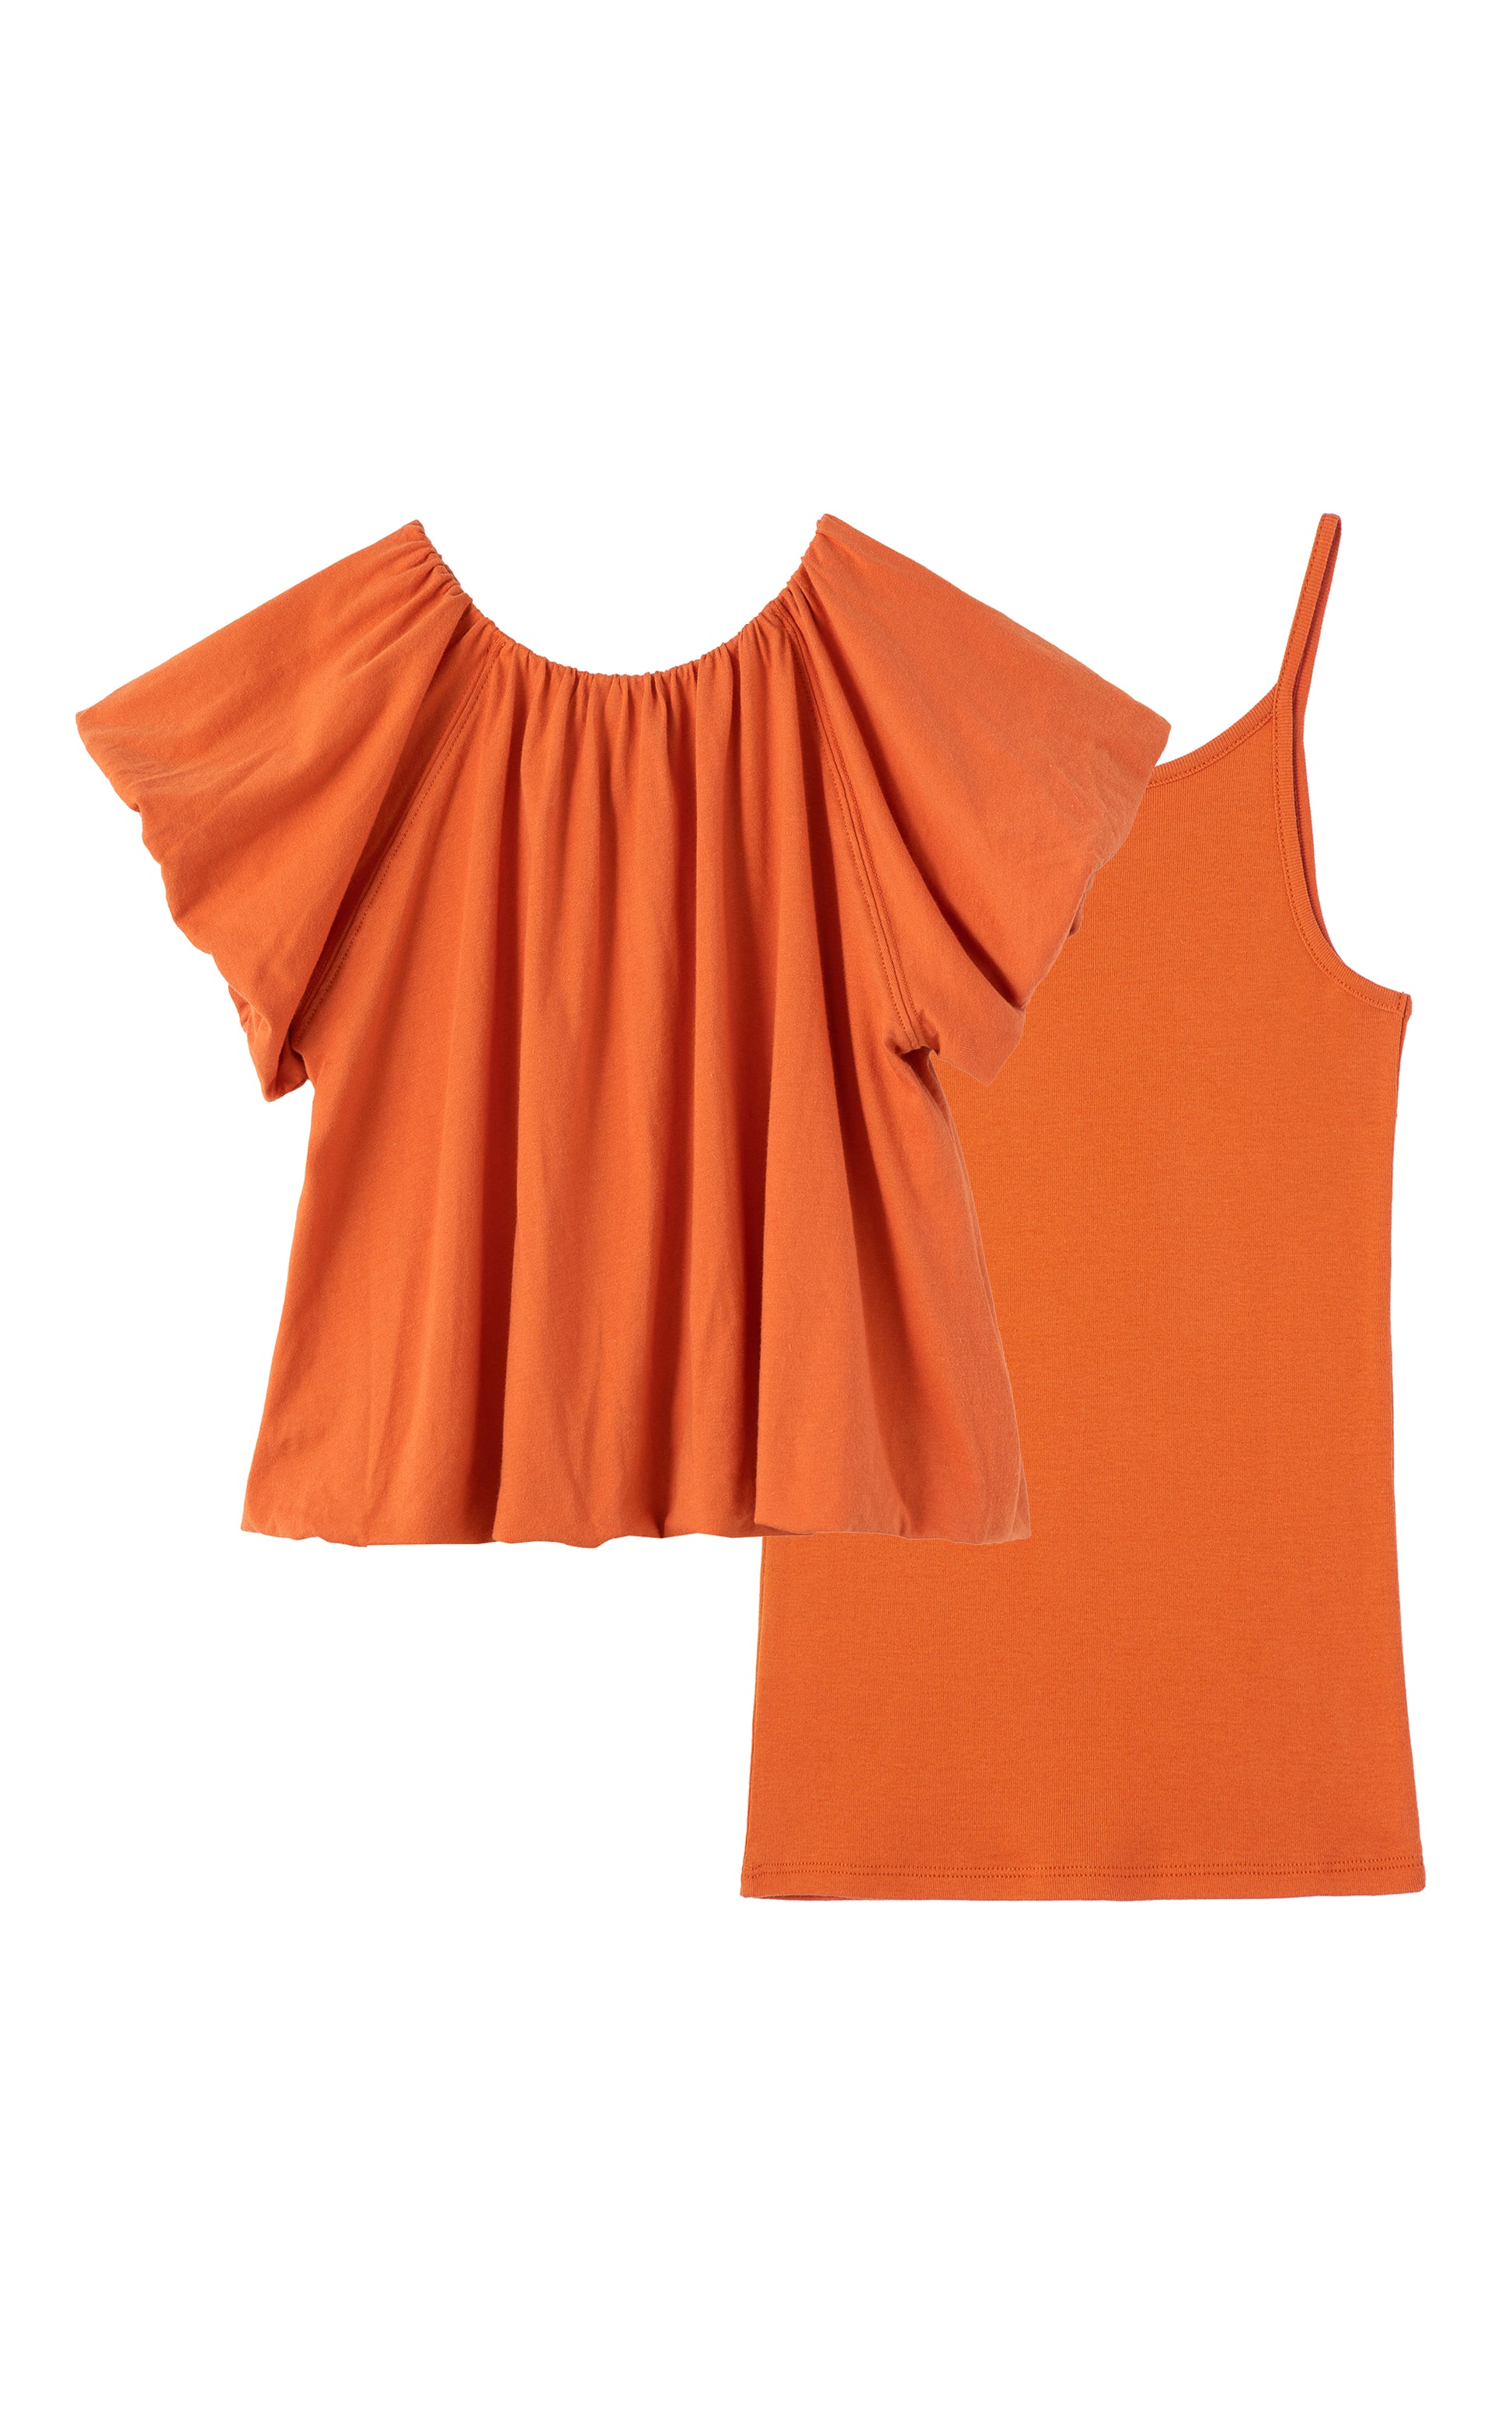 Back  view of an orange off the shoulder top and matching tank top 